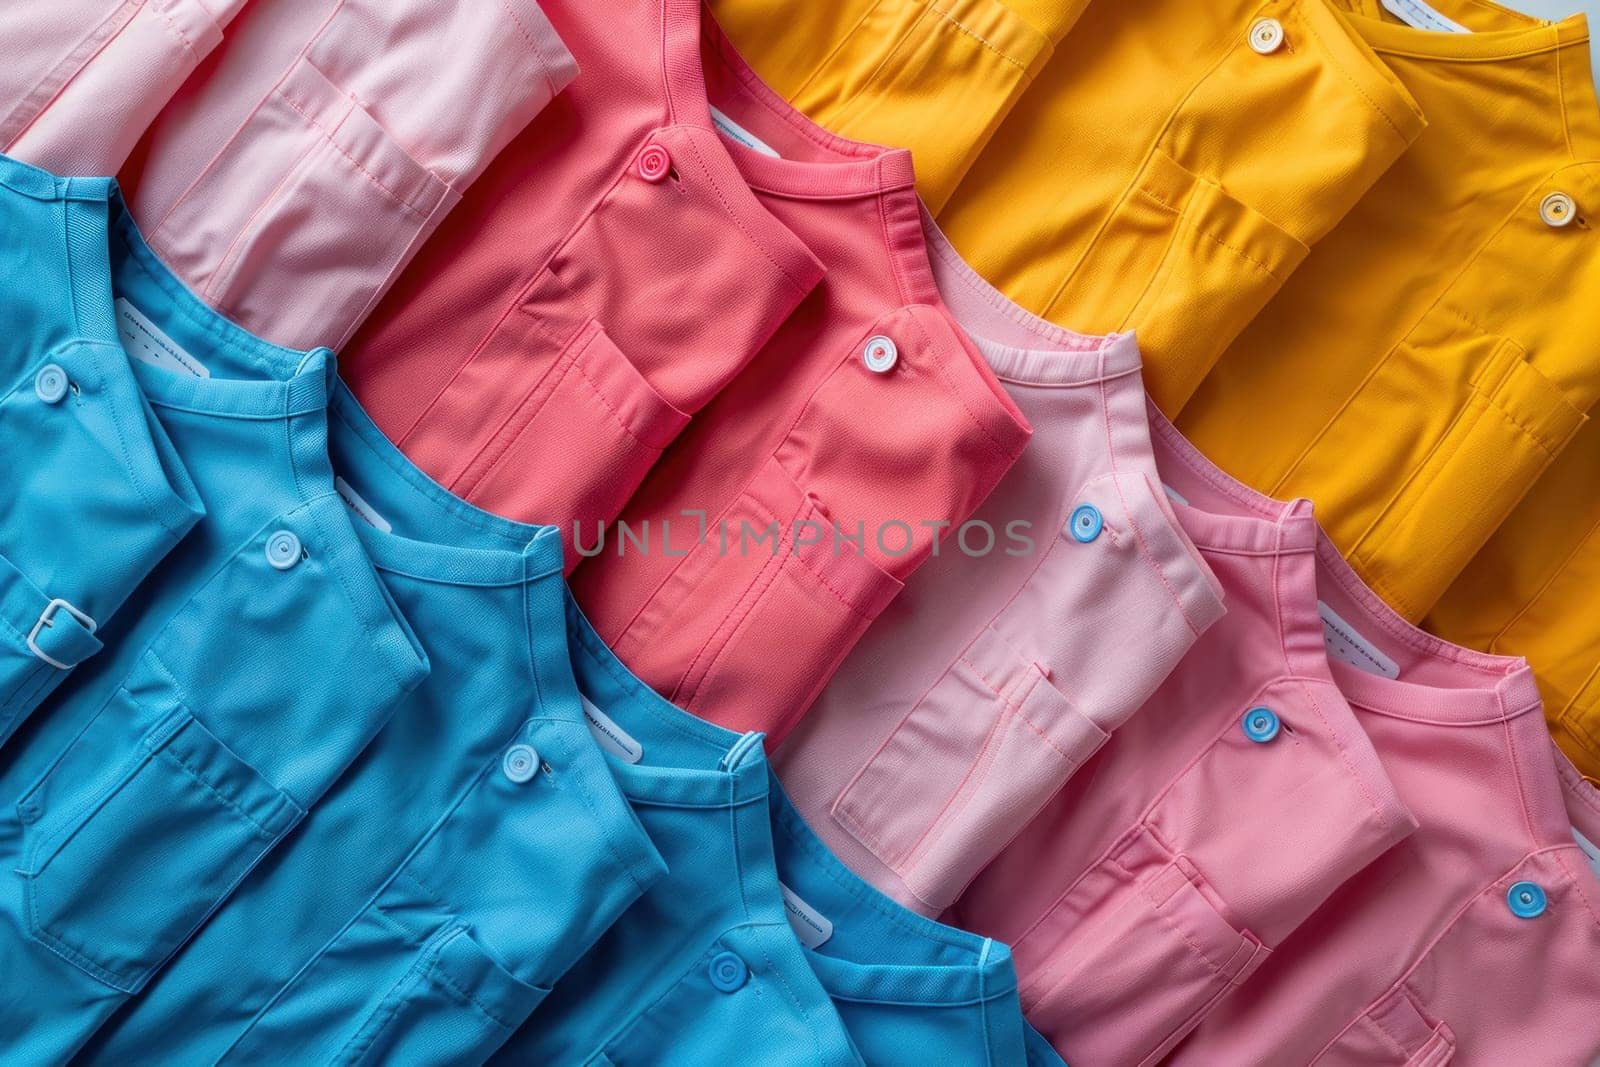 A row of shirts in different colors, including pink, yellow, and blue.